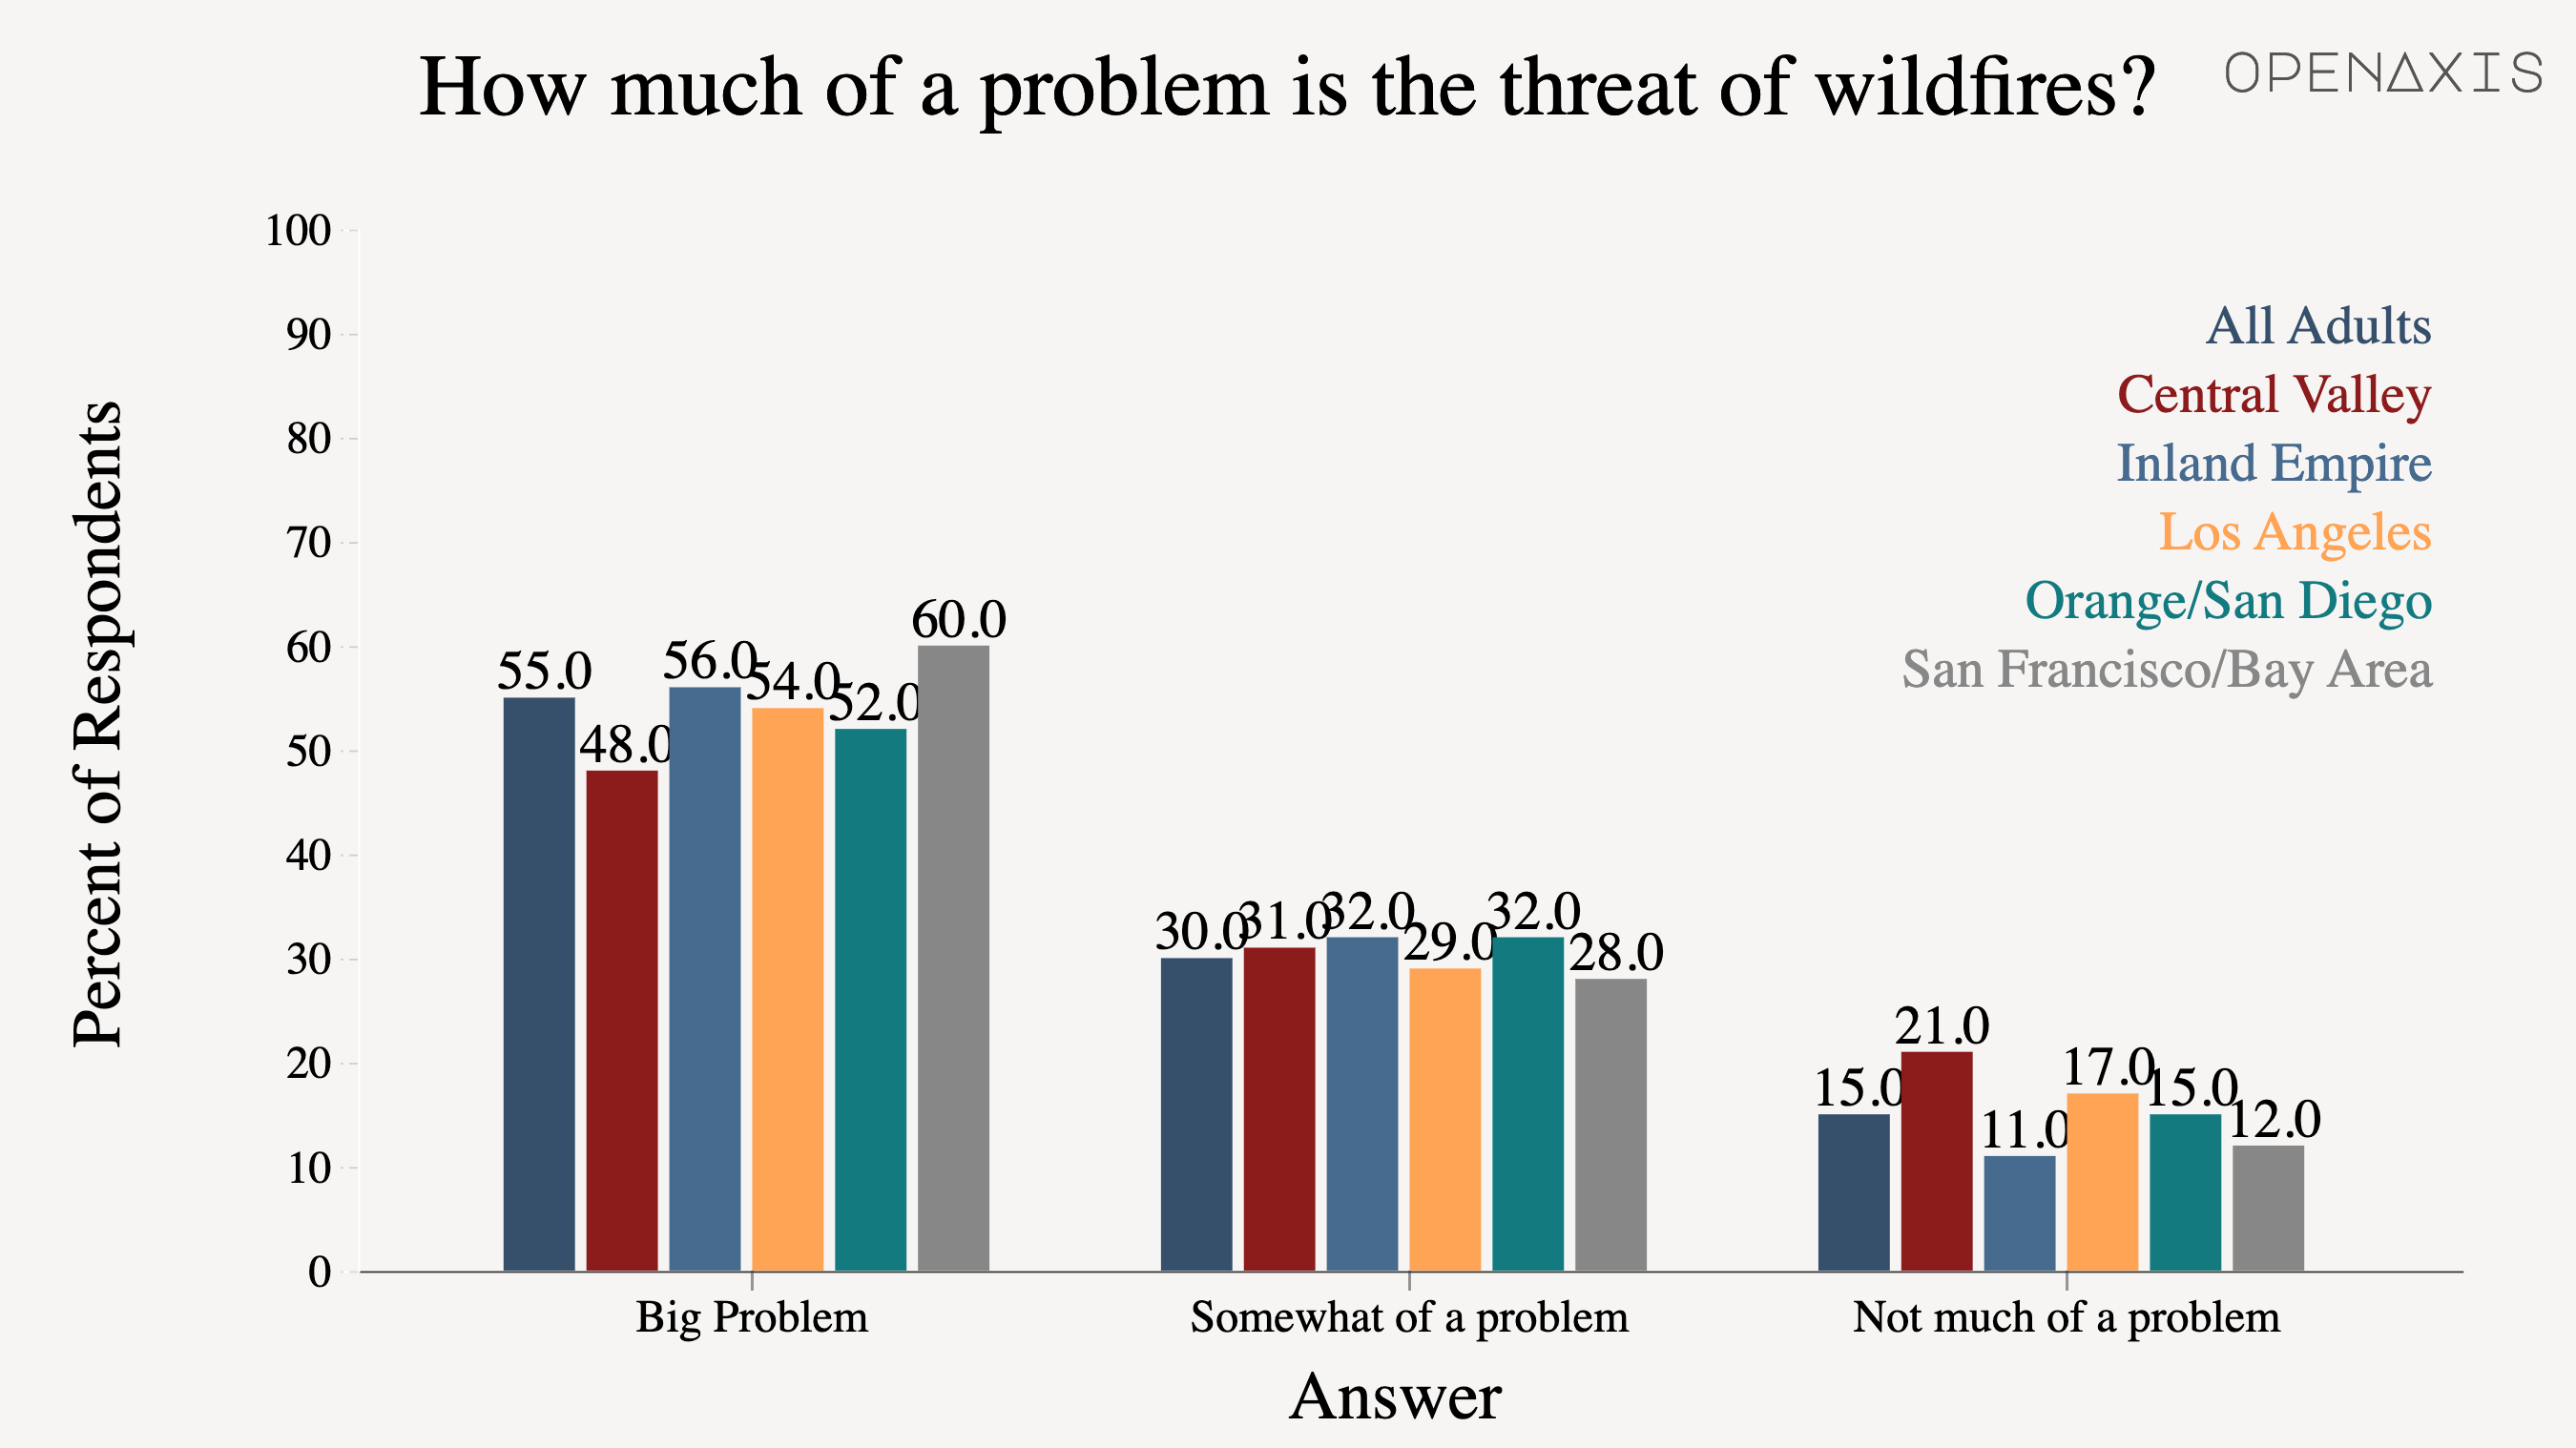 <p>According to PPIC's 2021 environmental report, 55% of Californians say the threat of wildfires is a big problem in their part of the state. Find the full report <a href="https://www.ppic.org/wp-content/uploads/ppic-statewide-survey-californians-and-the-environment-july-2021.pdf" target="_blank">here</a>.</p><p><br /></p><p><span data-index="0" data-denotation-char data-id="0" data-value="&lt;a href=&quot;/search?q=%23environmental&quot; target=_self&gt;#environmental" data-link="/search?q=%23environmental">﻿<span contenteditable="false"><span></span><a href="/search?q=%23environmental" target="_self">#environmental</a></span>﻿</span> </p><p><br /></p><p>Source: <a href="https://www.ppic.org/publication/ppic-statewide-survey-californians-and-the-environment-july-2021/" target="_blank">Public Policy Institute of California</a></p>